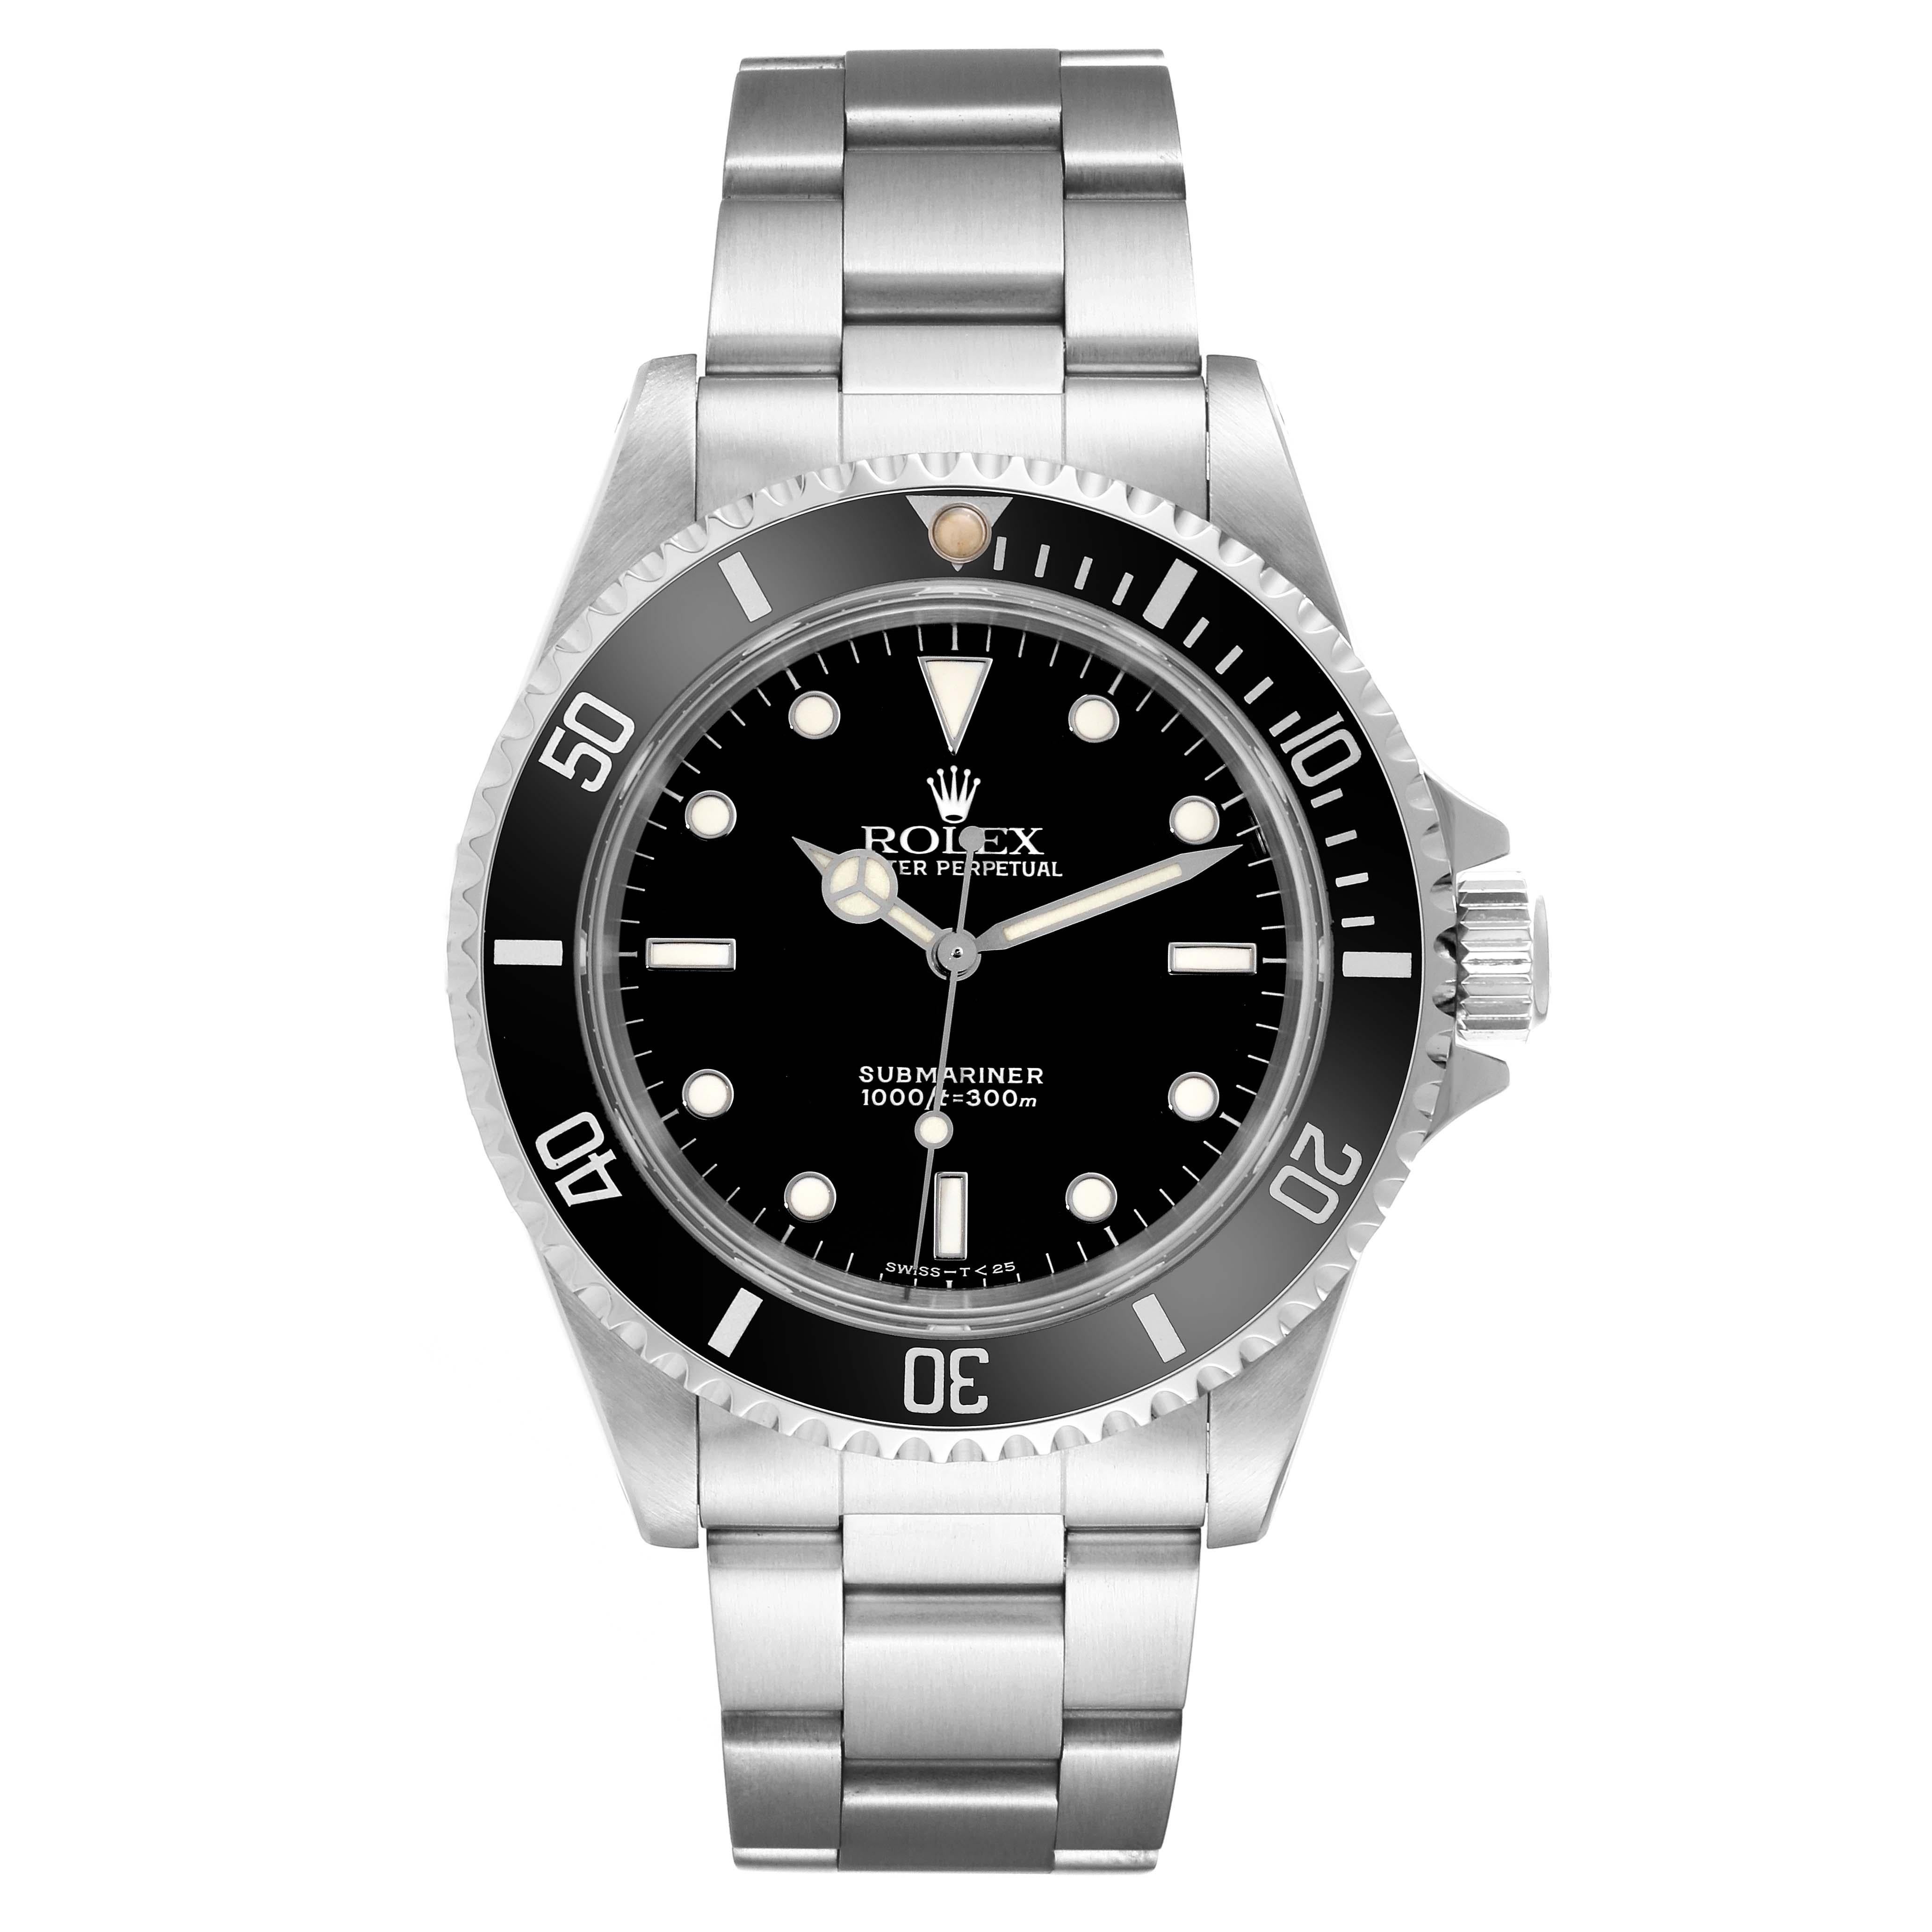 Rolex Submariner No Date 40mm 2 Liner Steel Mens Watch 14060 Box Papers. Officially certified chronometer automatic self-winding movement. Stainless steel case 40.0 mm in diameter. Rolex logo on the crown. Special time-lapse unidirectional rotating